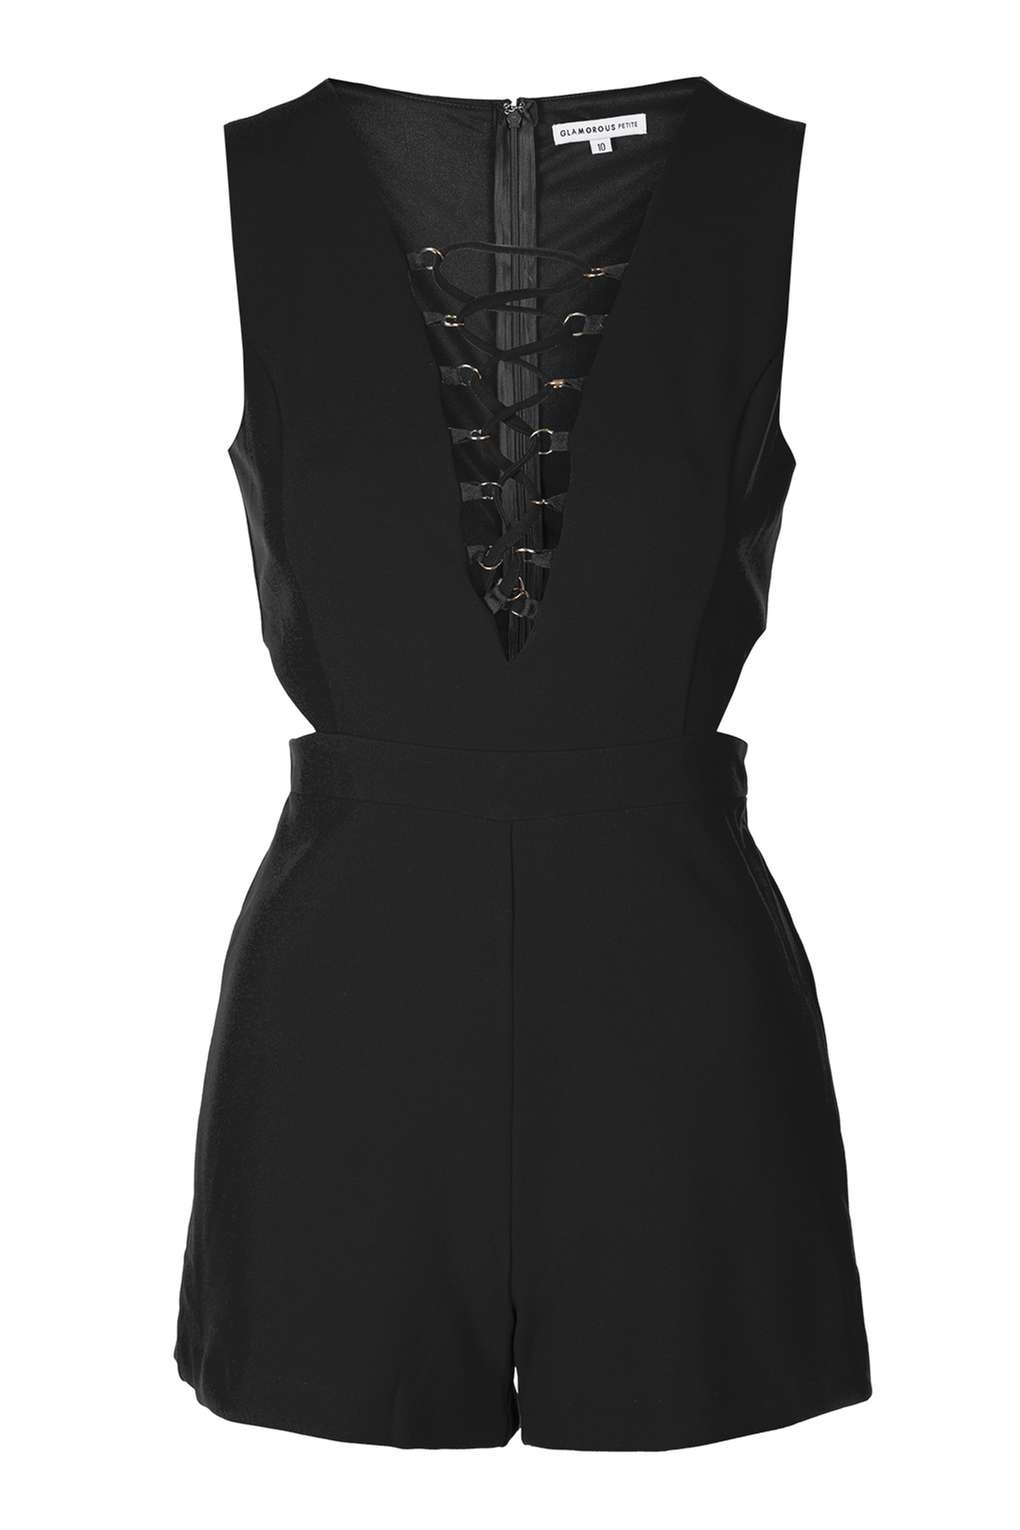 Lace-Up Playsuit by Glamorous Petites, Topshop, €46